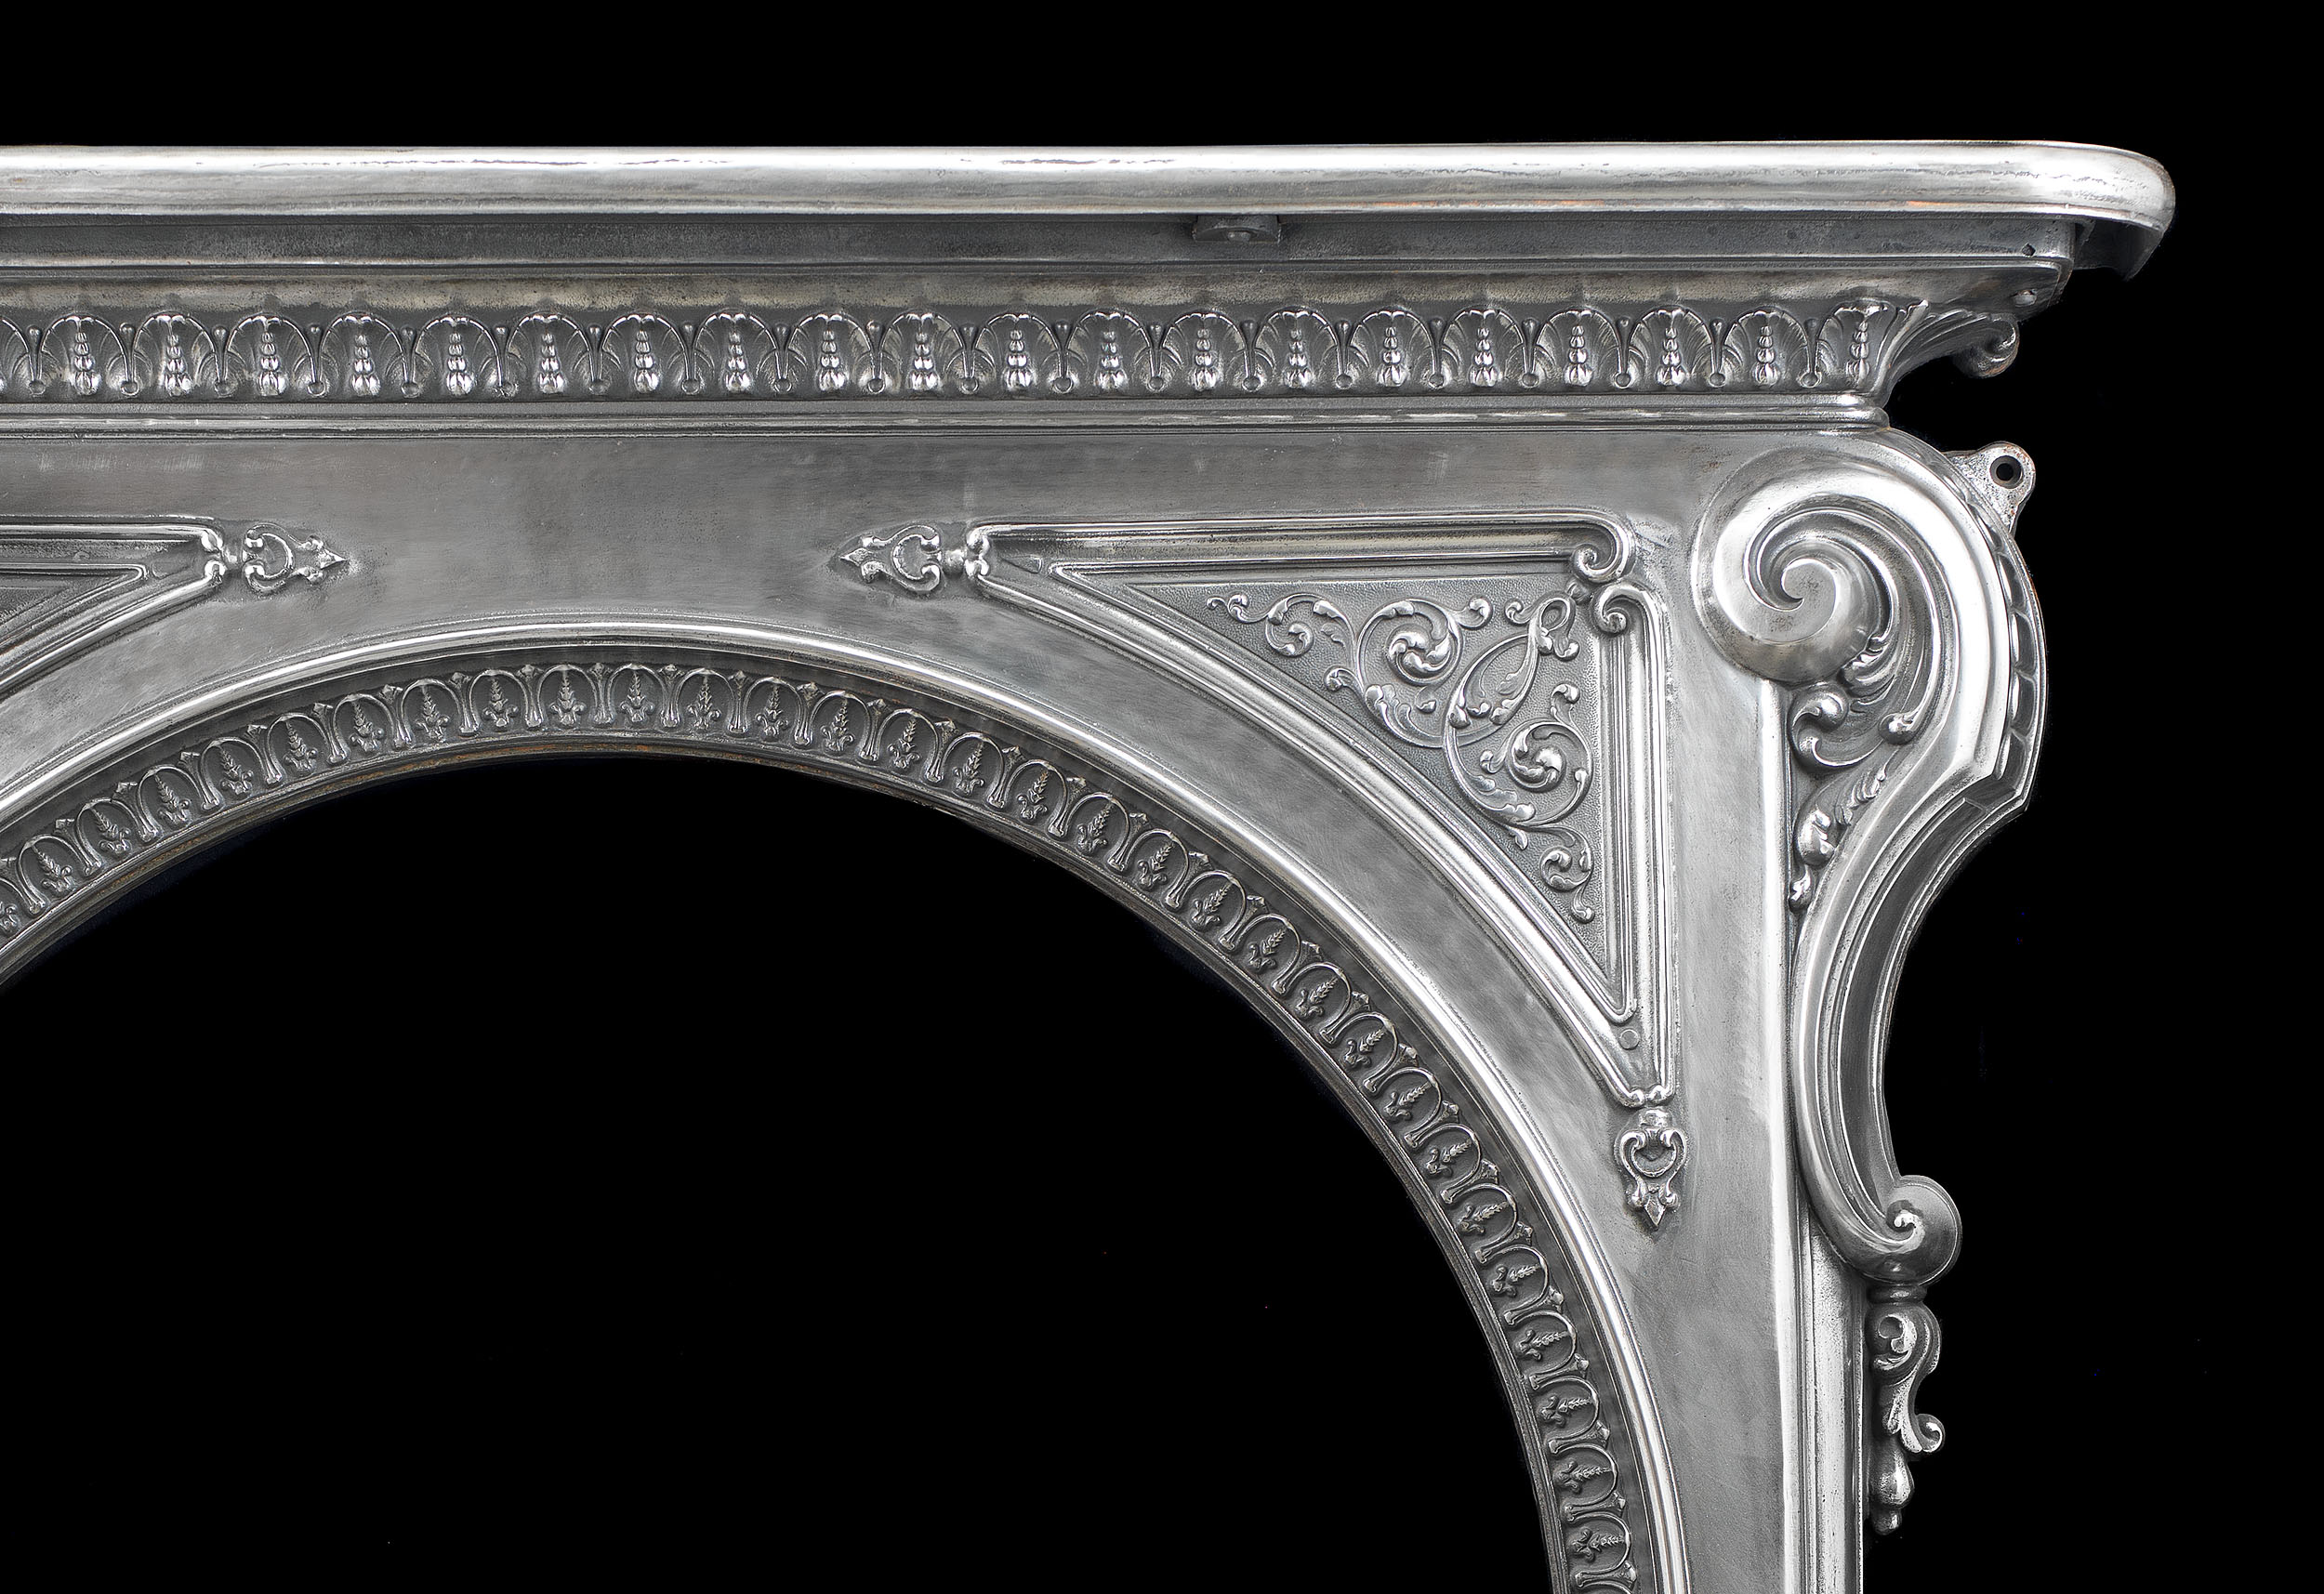 A Cast Iron Rococo Style Fireplace Mantel